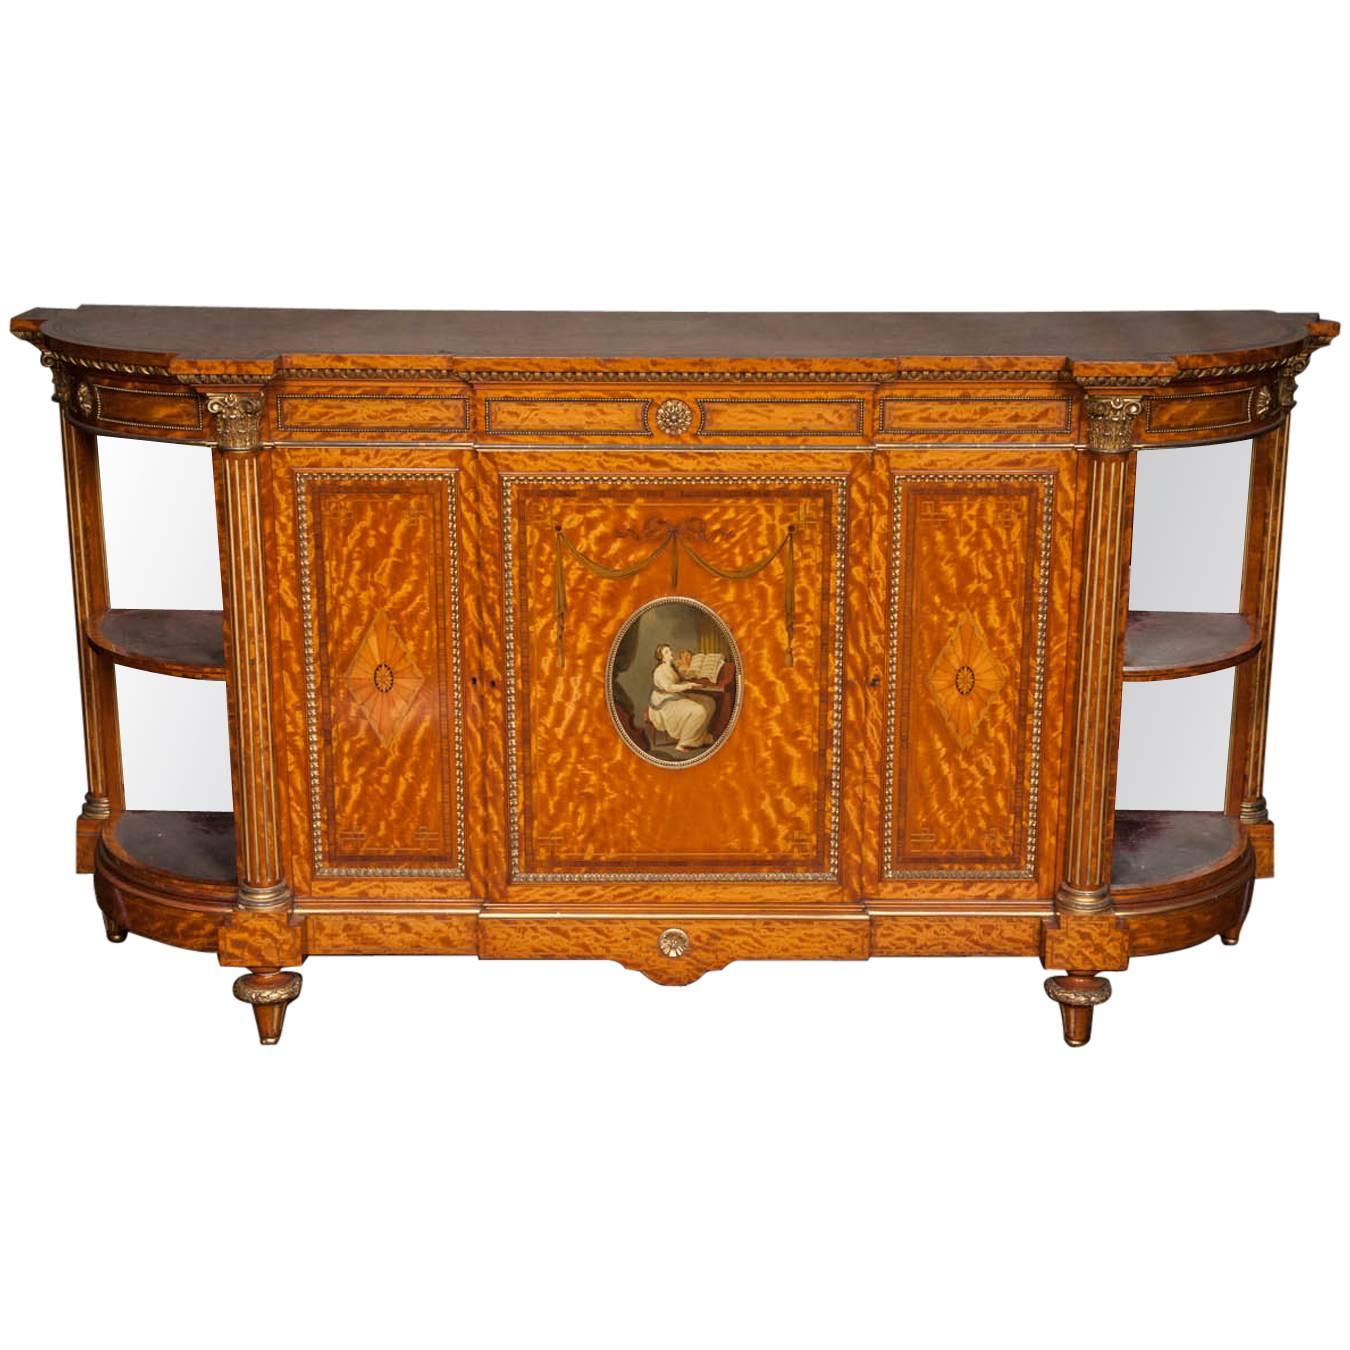 Fine quality C19th classical side cabinet. 80" (203cm) wide